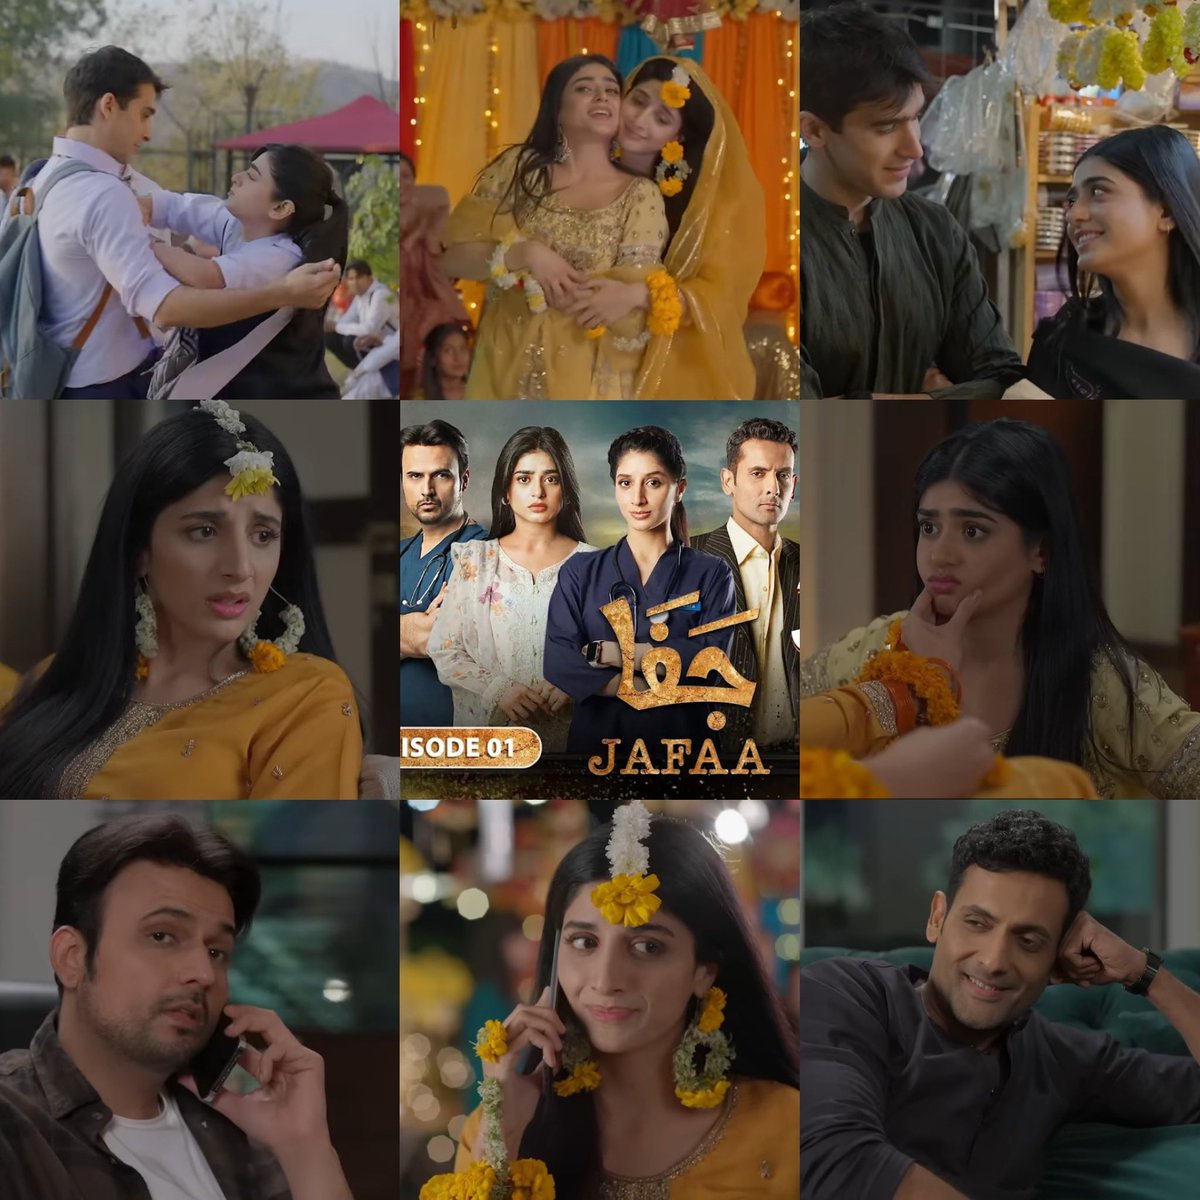 LOVED #Jafaa. From #MawraHussain’s level-headed, cool Dr. Zara to #SeharKhan’s chirpy, lively Andaleeb, their loving family system & significant others, this is everything a 1st episode should be! Now waiting for the angst! #PakistaniDramas #MohibMirza #UsmanMukhtar #MawraHocane